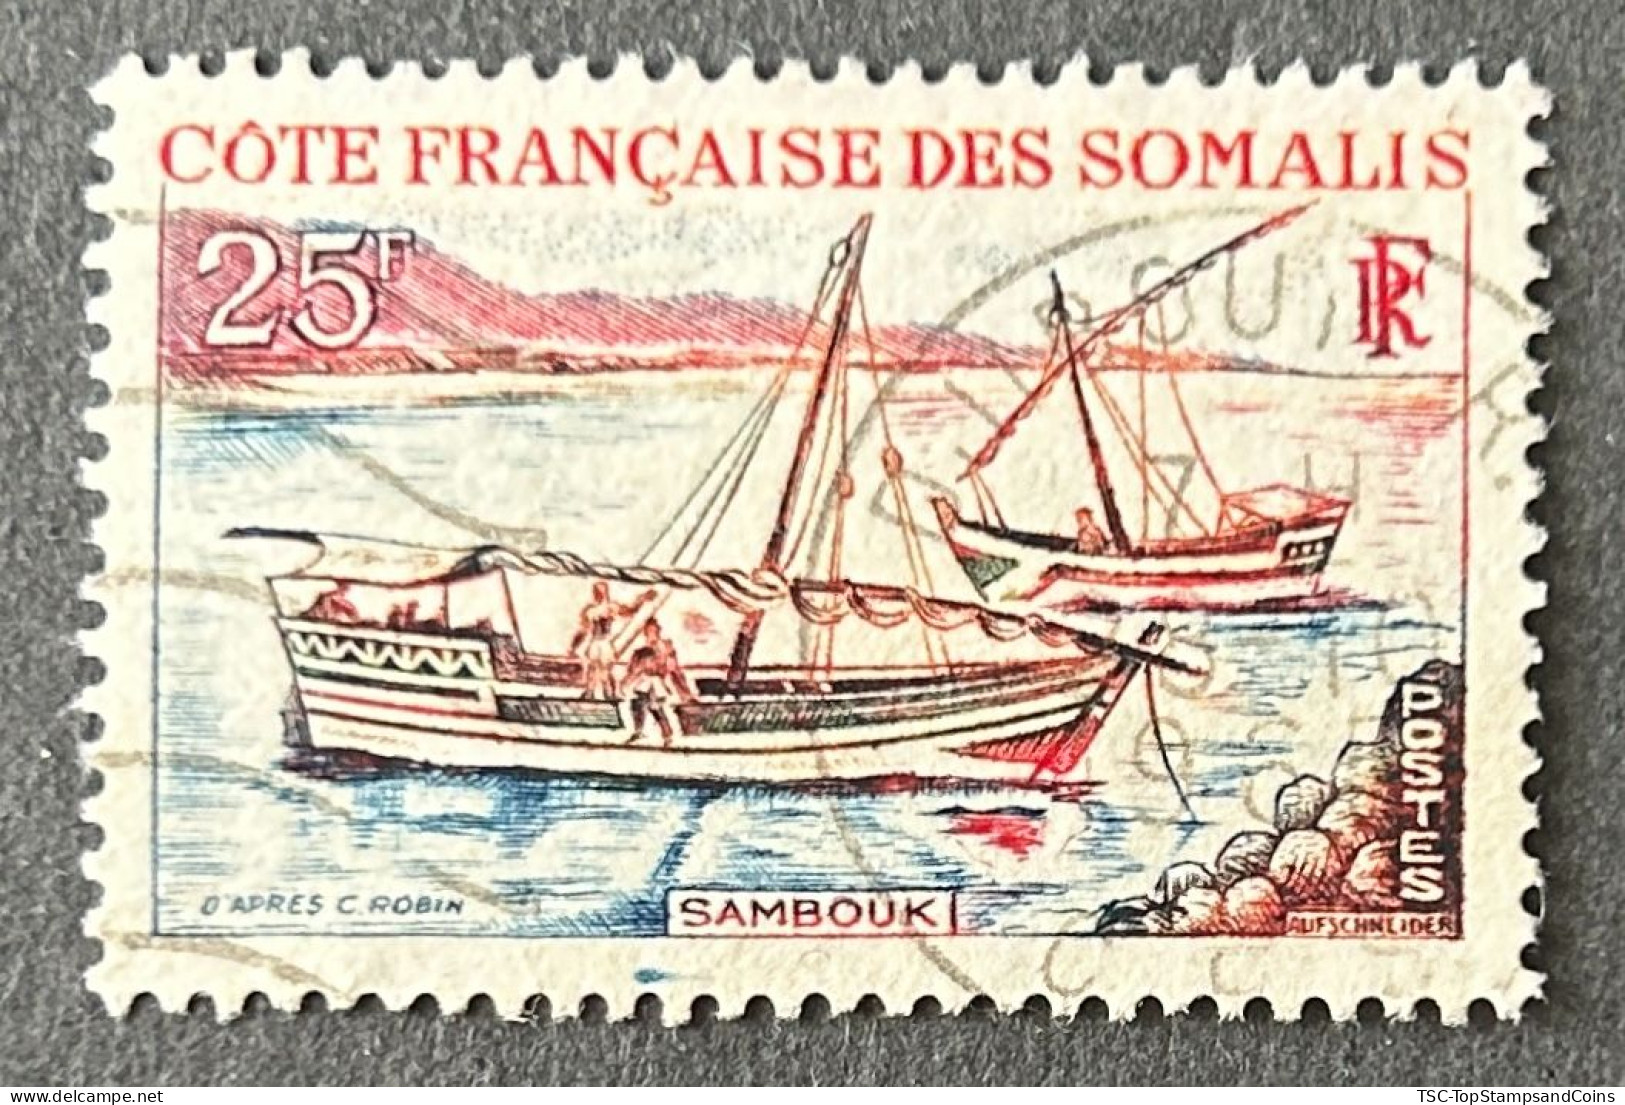 FRSO0321U - Local Dhows - Sambouk - 25 F Used Stamp - French Somali Coast - 1964 - Used Stamps